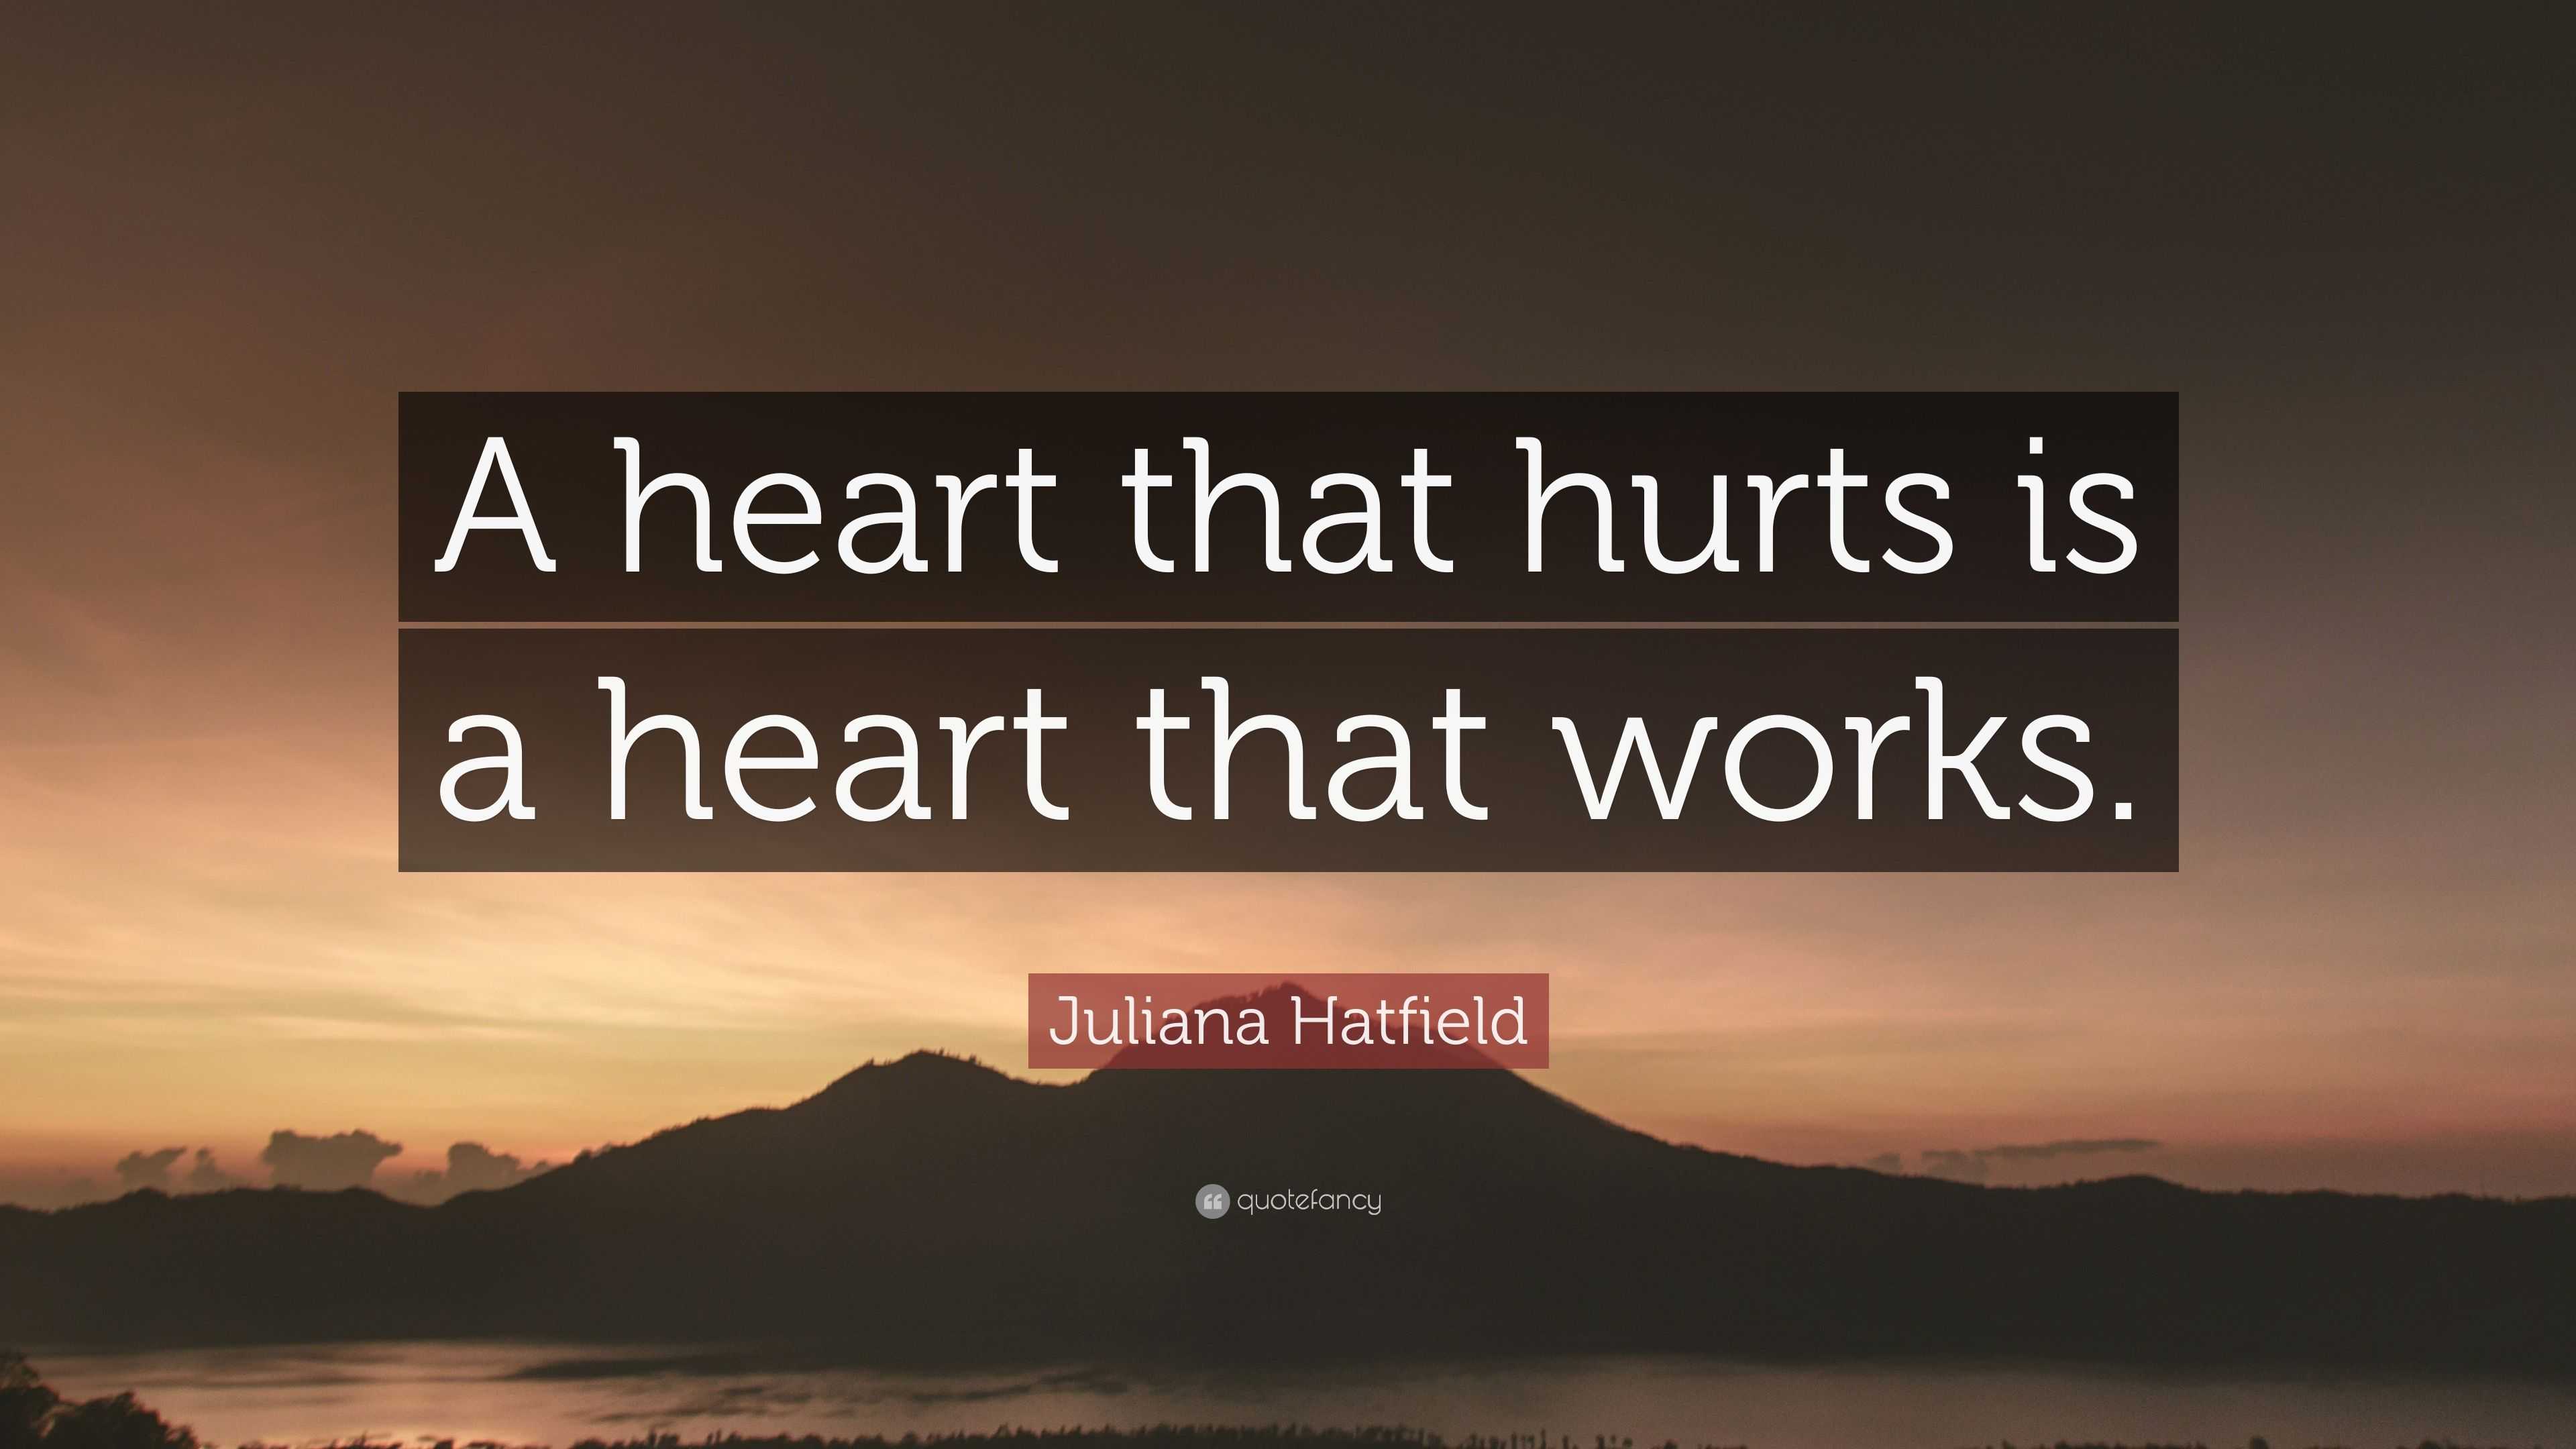 6200764-Juliana-Hatfield-Quote-A-heart-that-hurts-is-a-heart-that-works.jpg